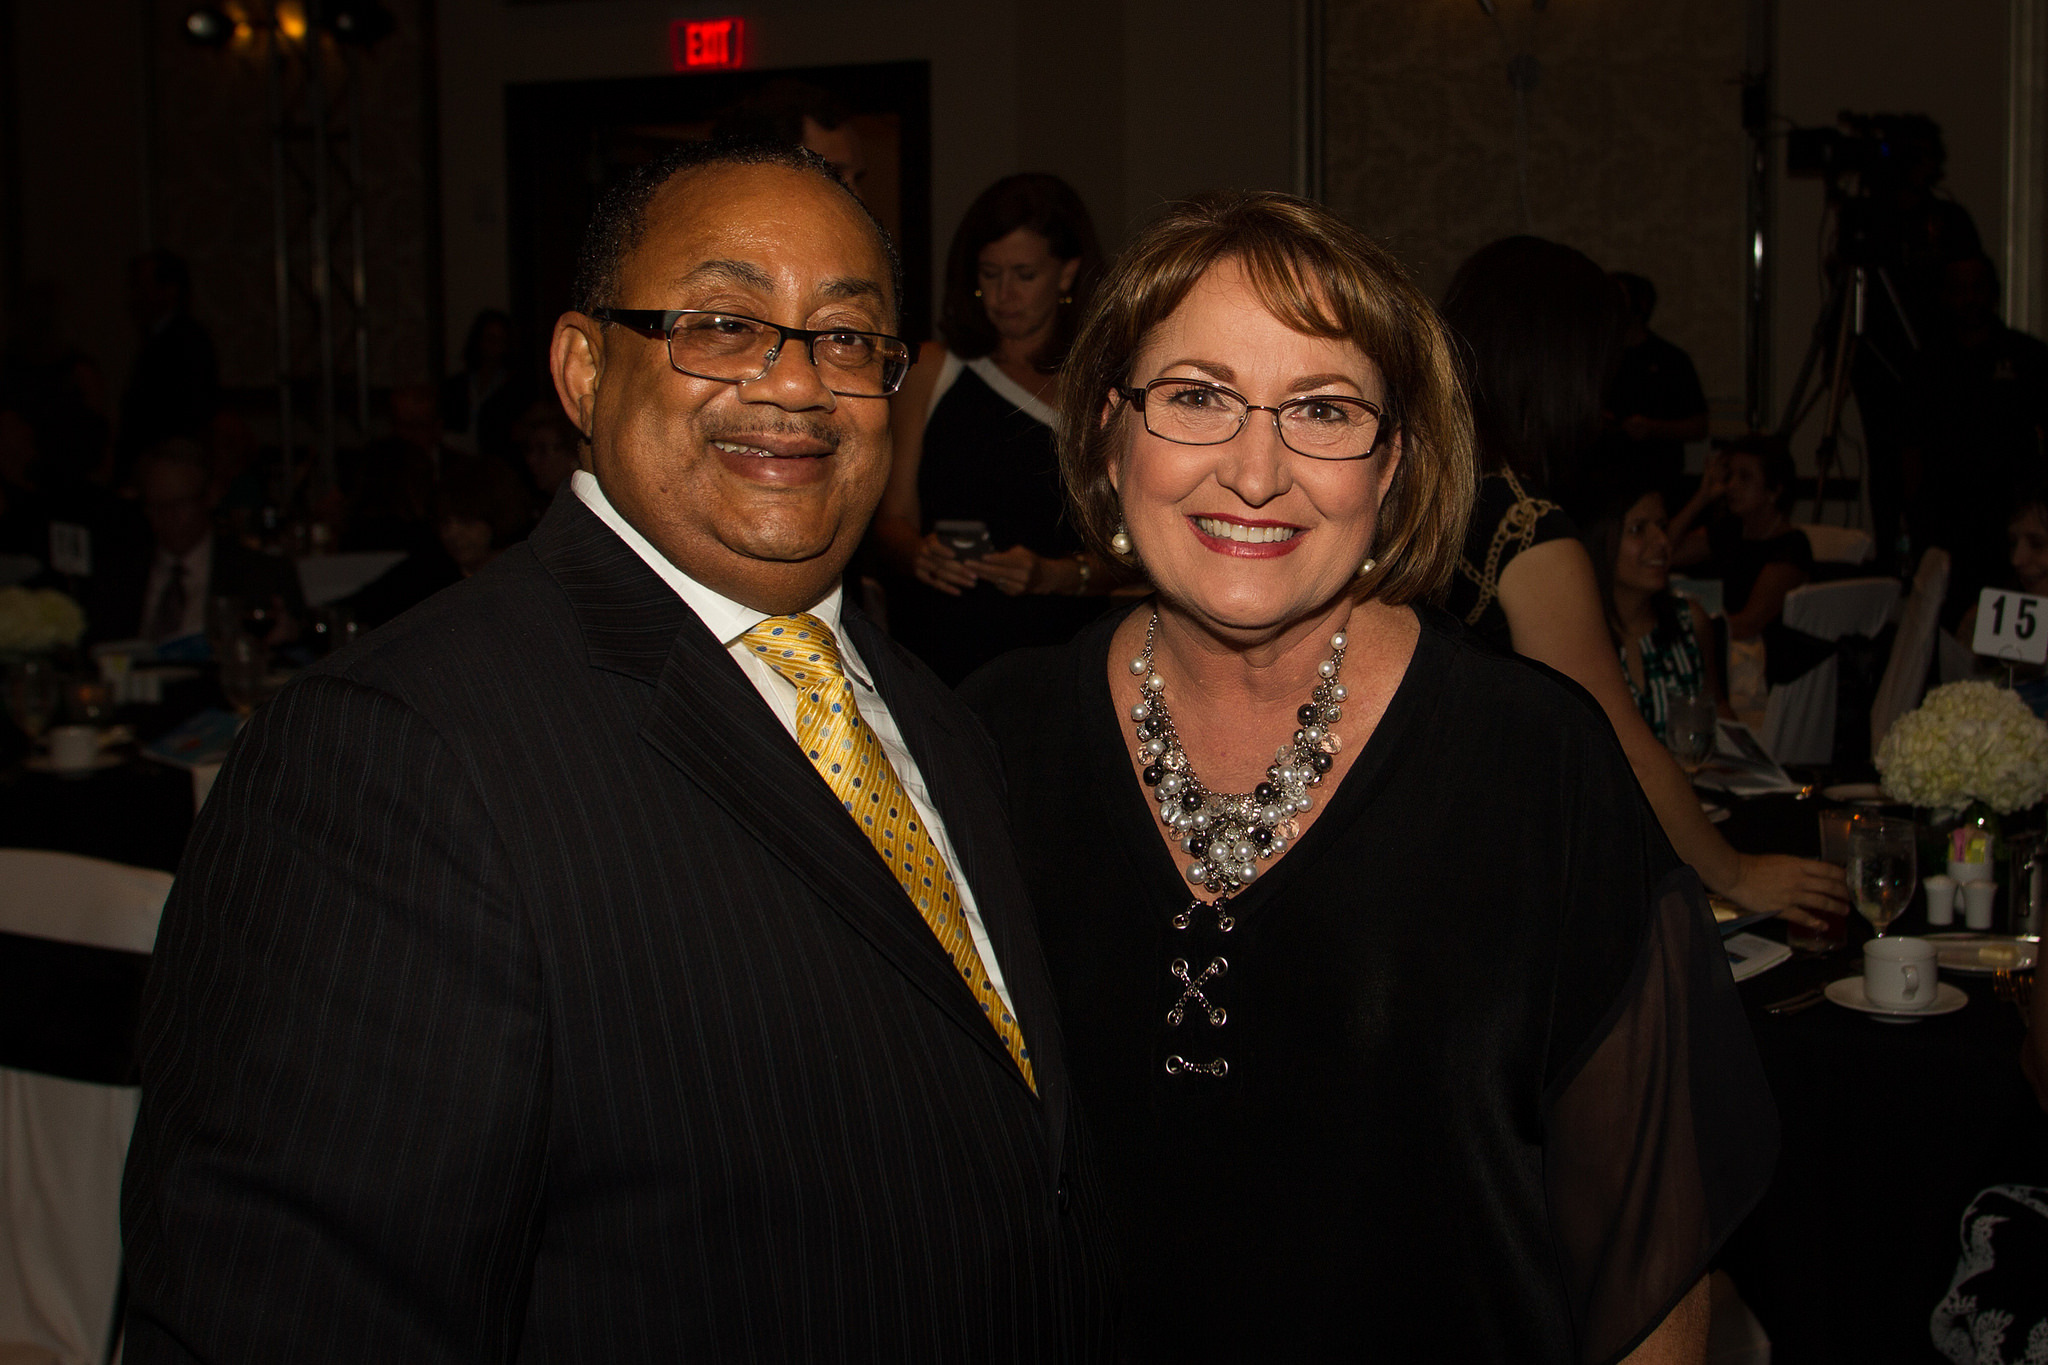 Mayor Jacobs and Chief Judge Belvin Perry, Jr.